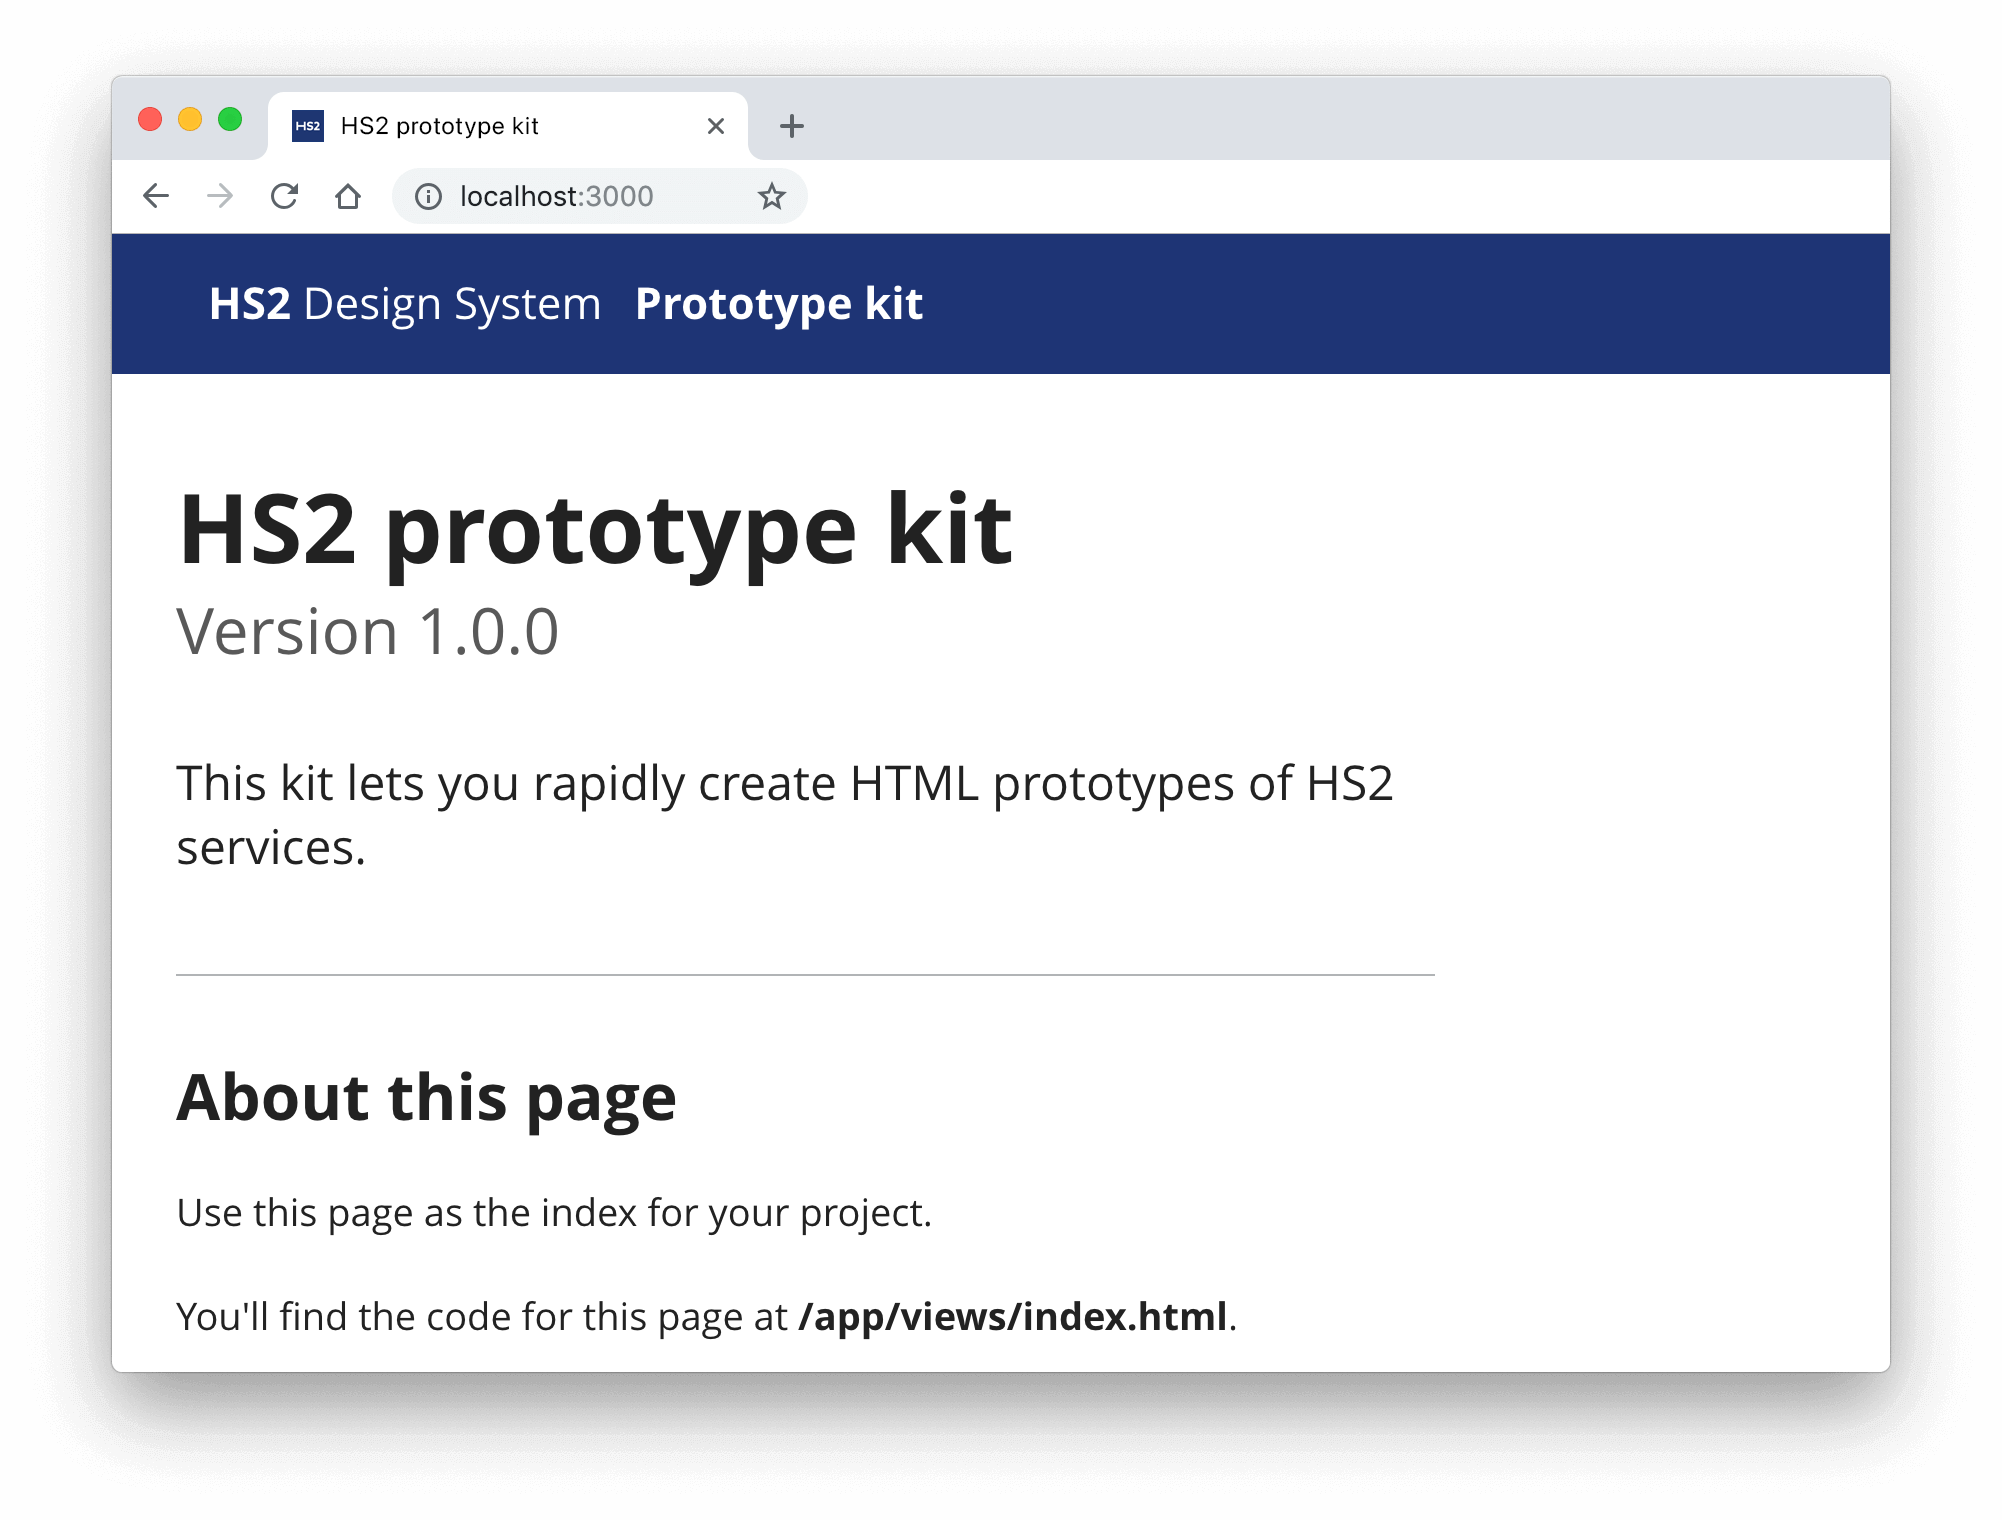 Screenshot of the prototype kit welcome page